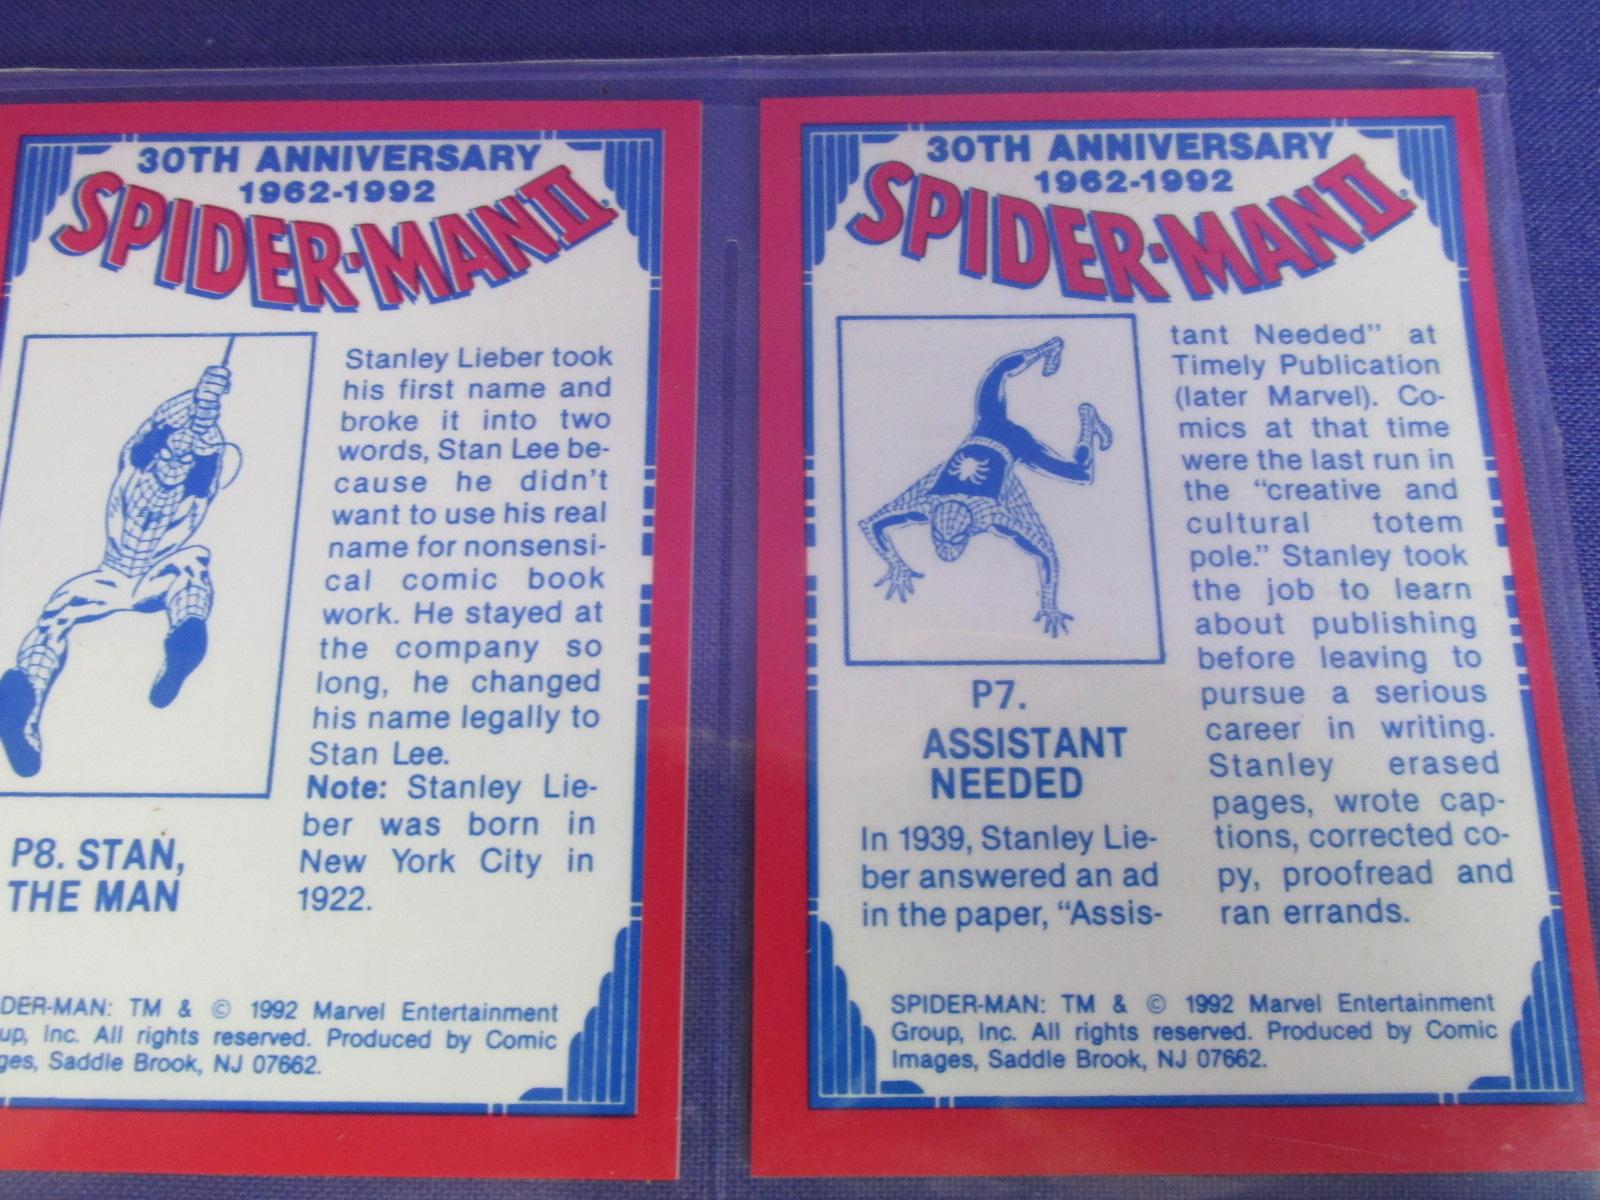 Lot of 6, “30th Anniversary” SPIDERMAN cards